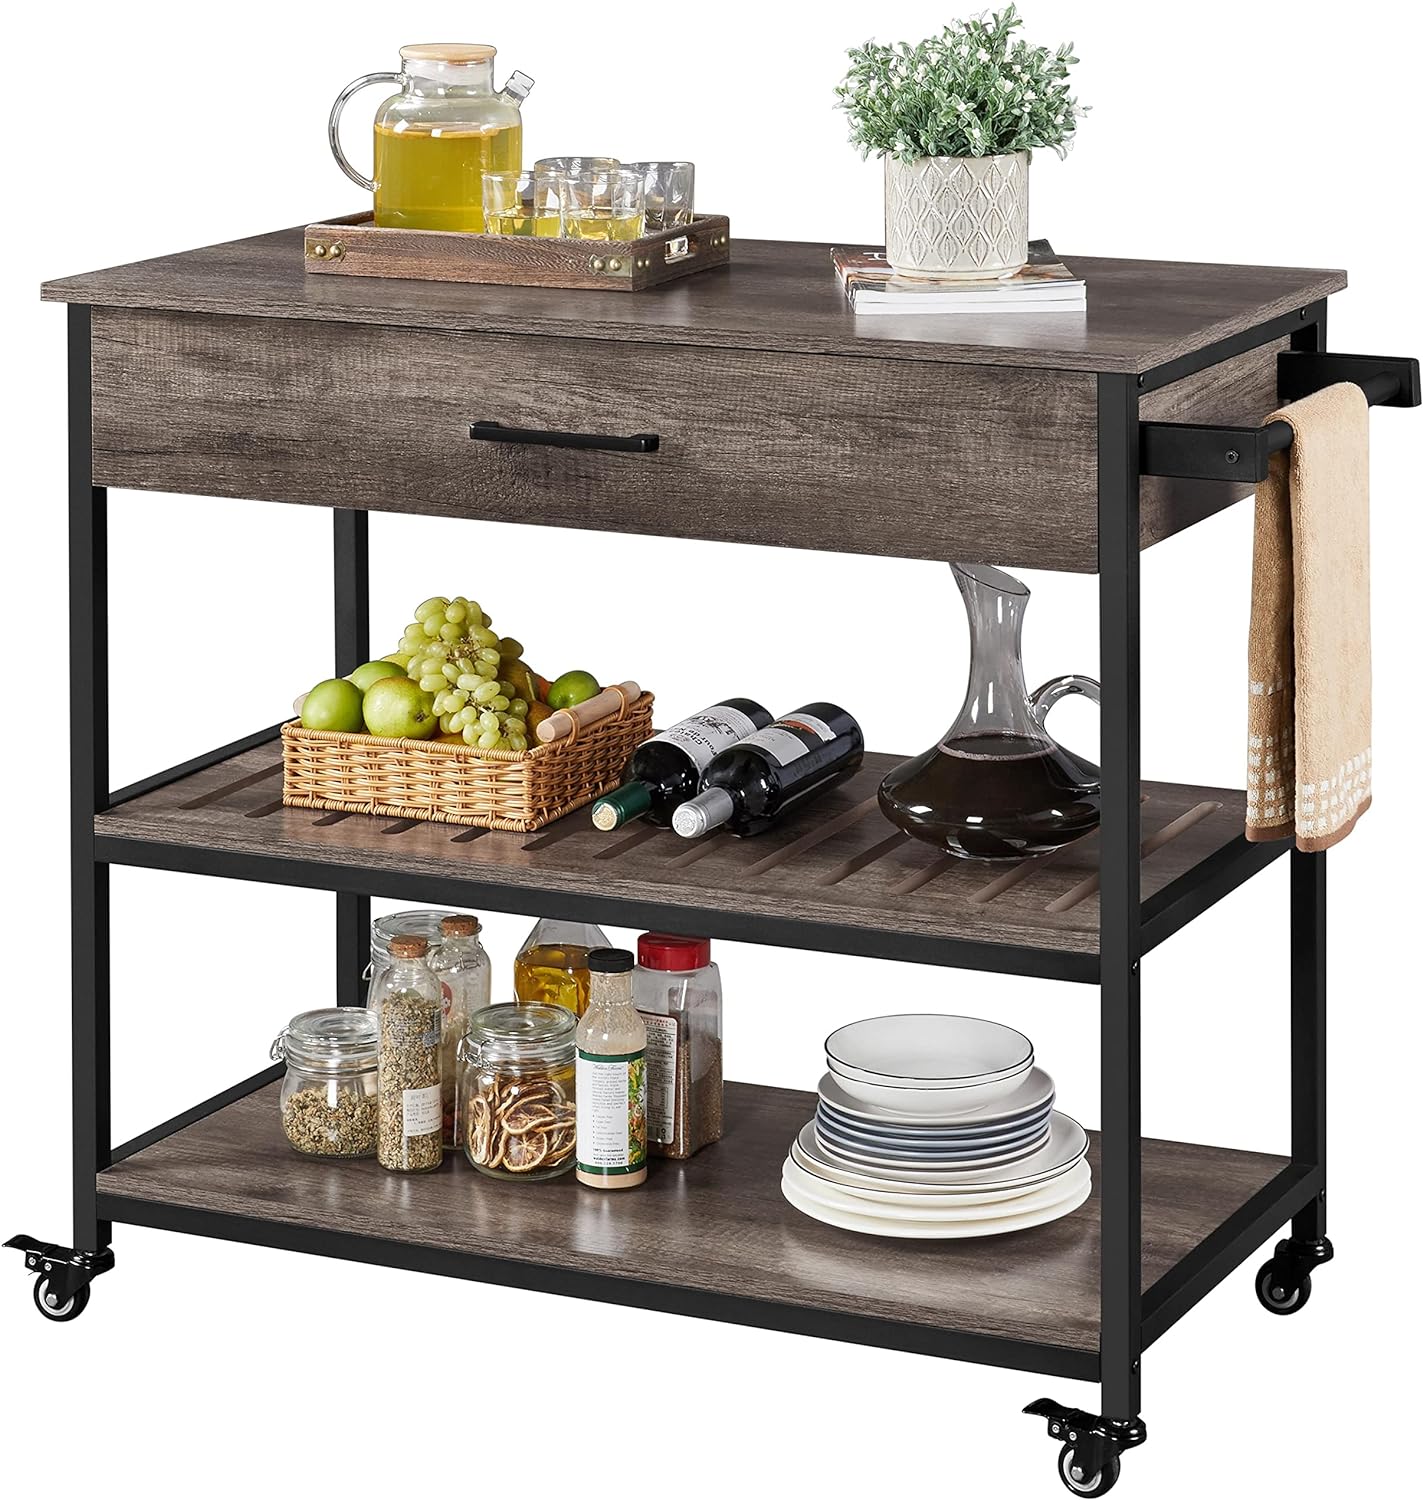 Yaheetech Kitchen Island on Wheels, Rolling Kitchen Cart with Storage Drawer and Towel Rack, Utility Shelf Microwave Stand Cart with Lockable Wheels for Dining Room, 40 x 20 x 36 inches, Taupe Wood